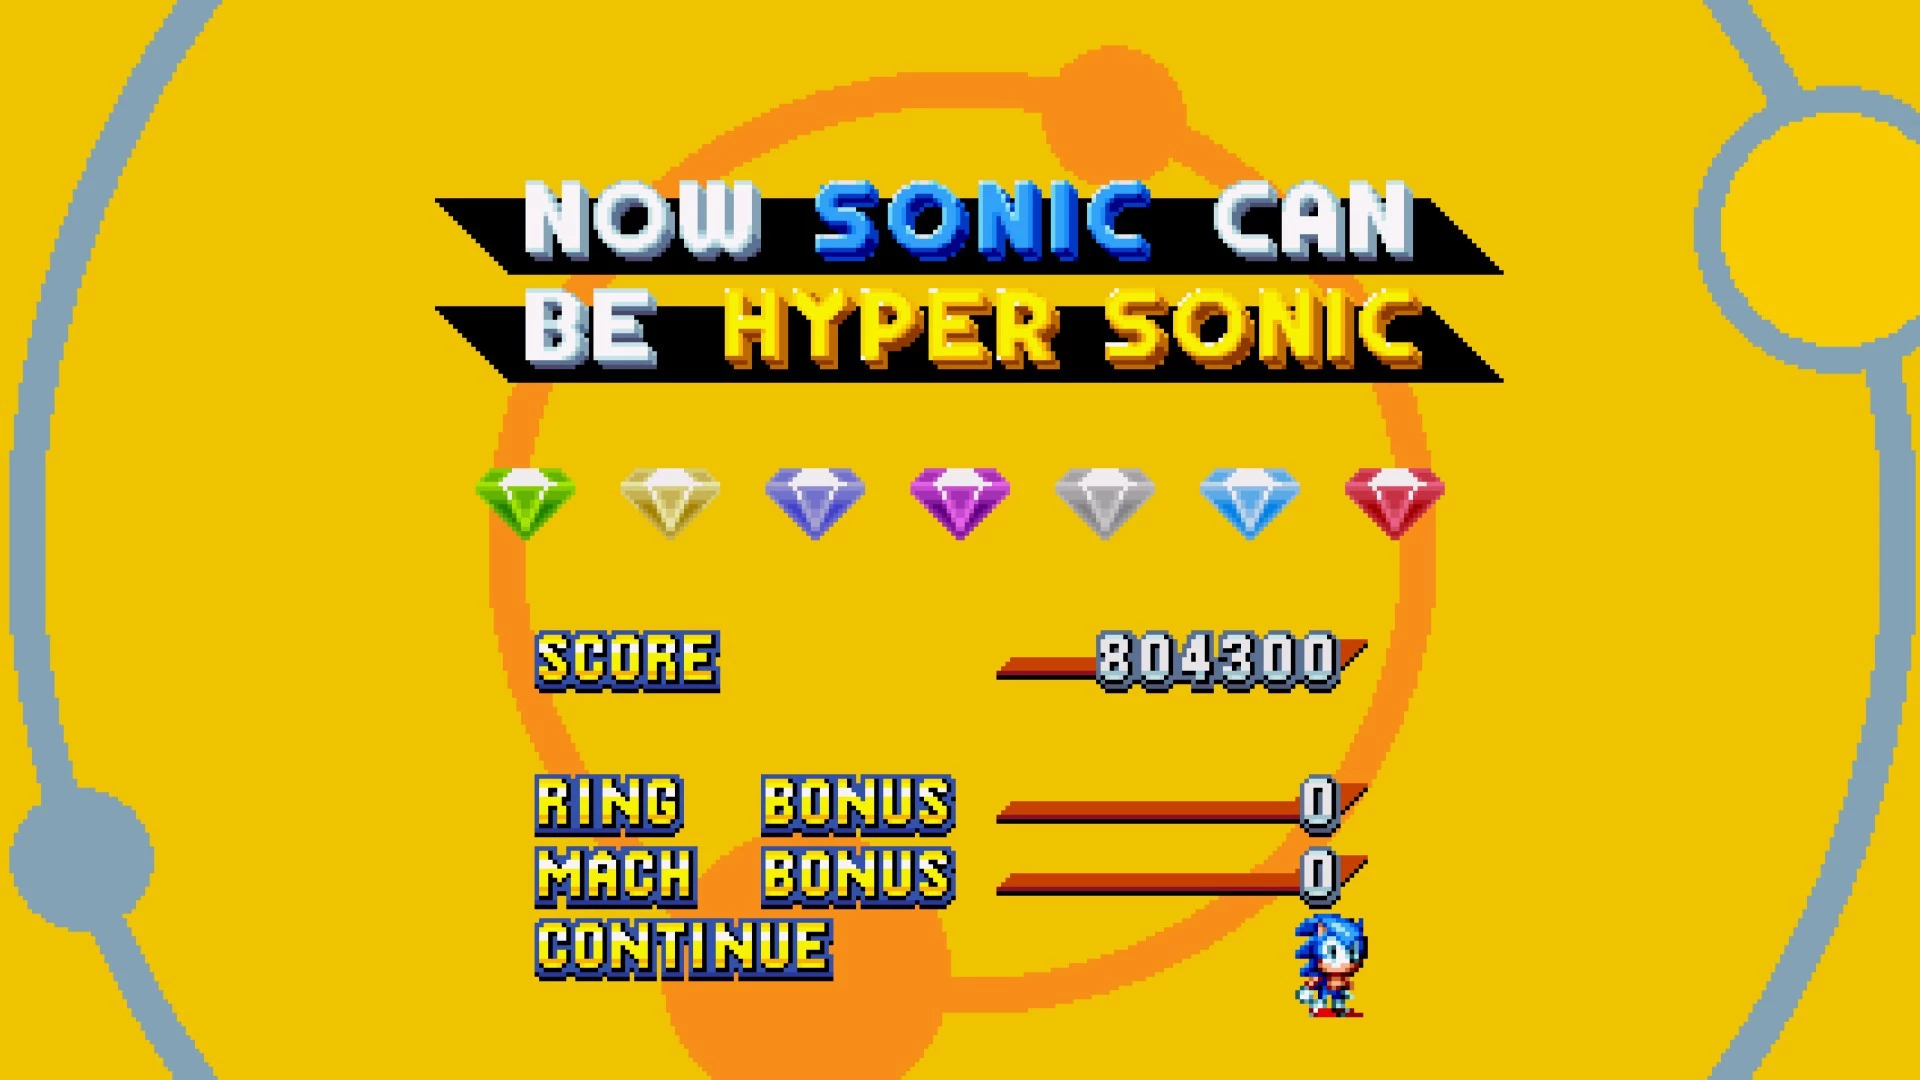 Hyper Forms [Sonic Mania] [Mods]